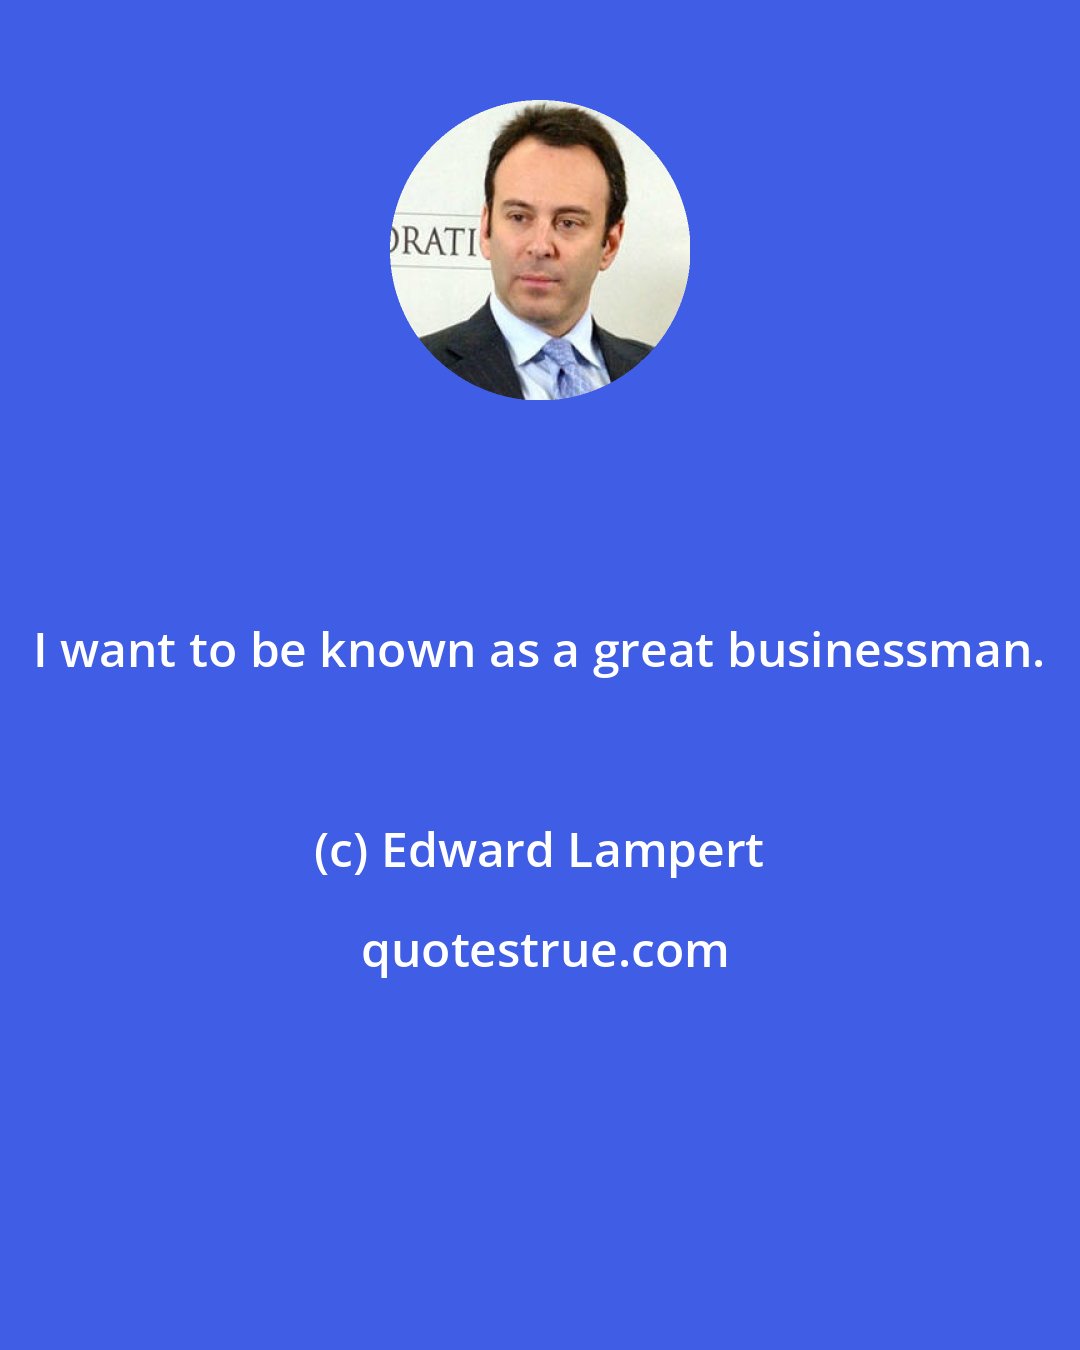 Edward Lampert: I want to be known as a great businessman.